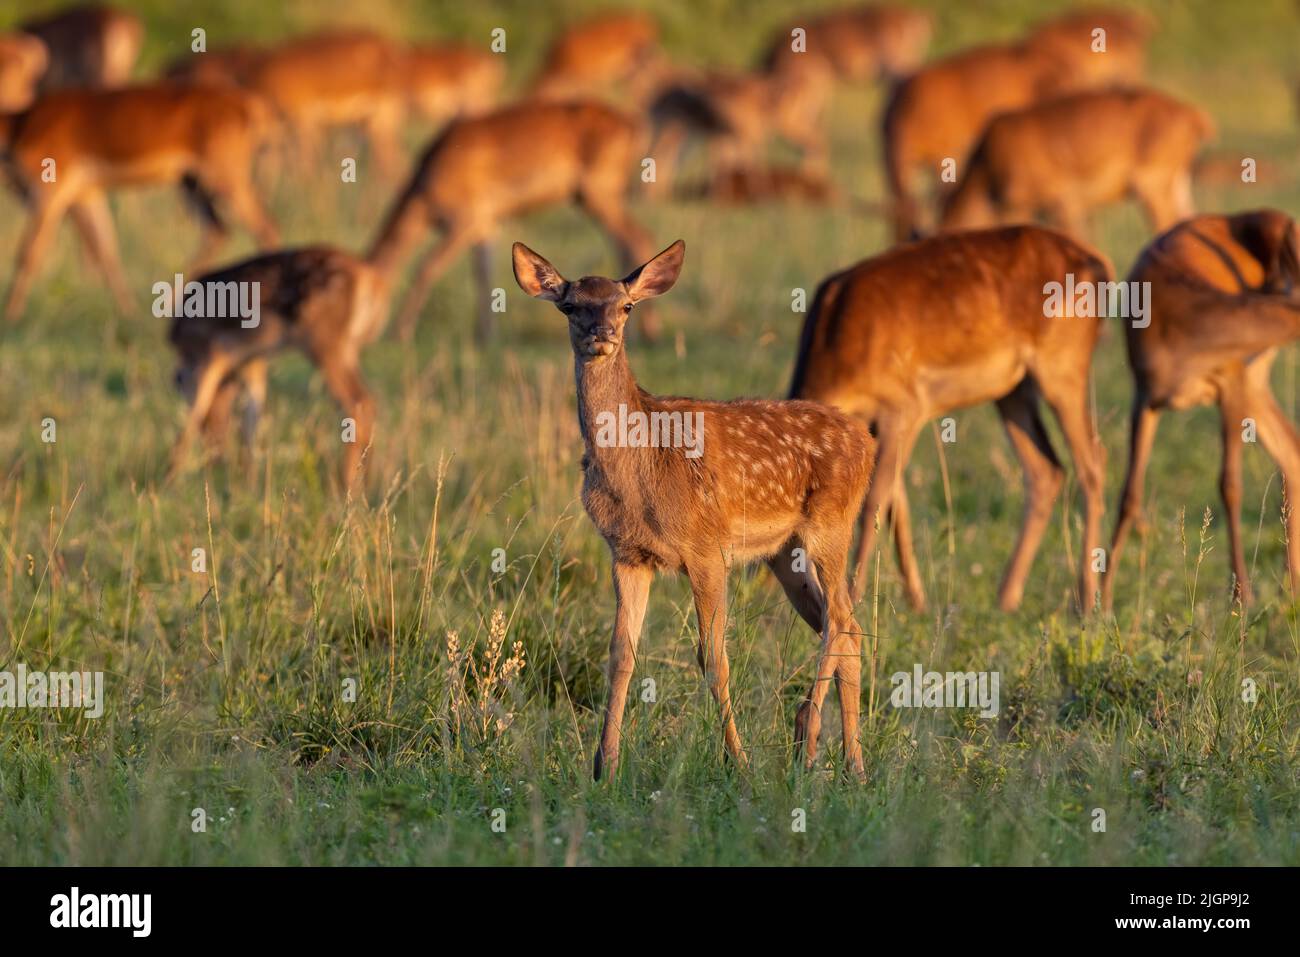 Young red deer walking on grassland with herd in background Stock Photo